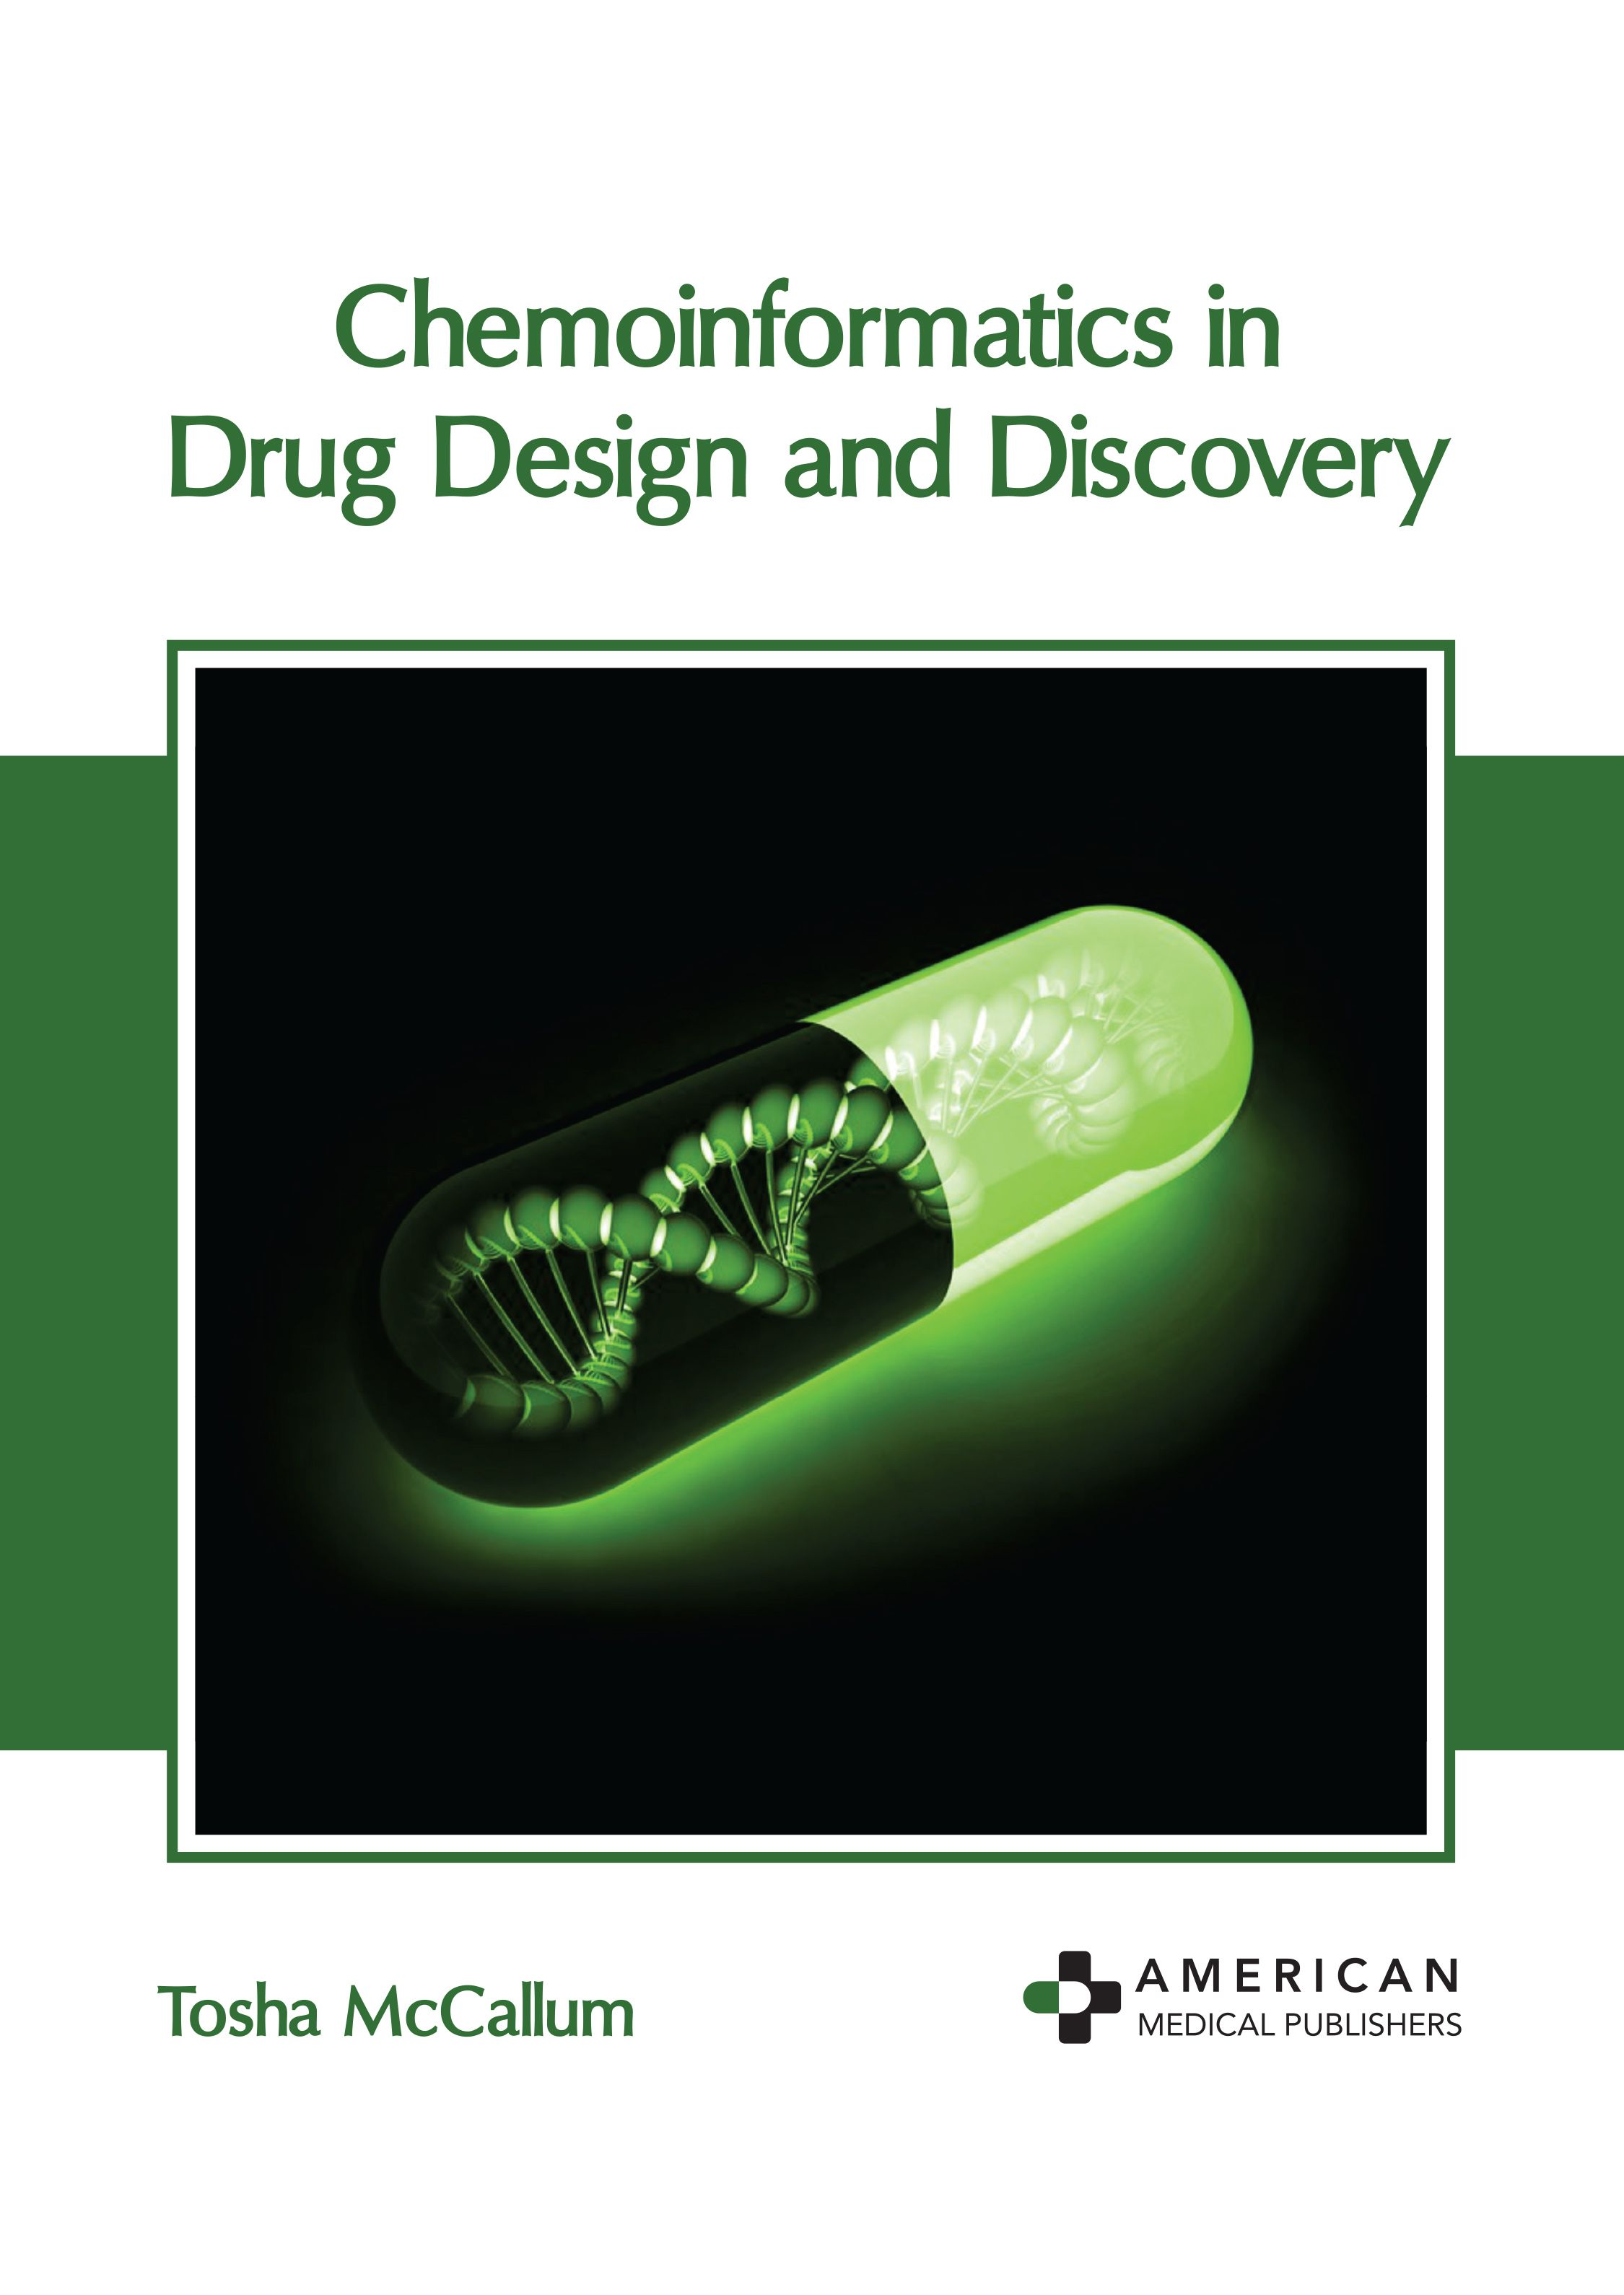 CHEMOINFORMATICS IN DRUG DESIGN AND DISCOVERY